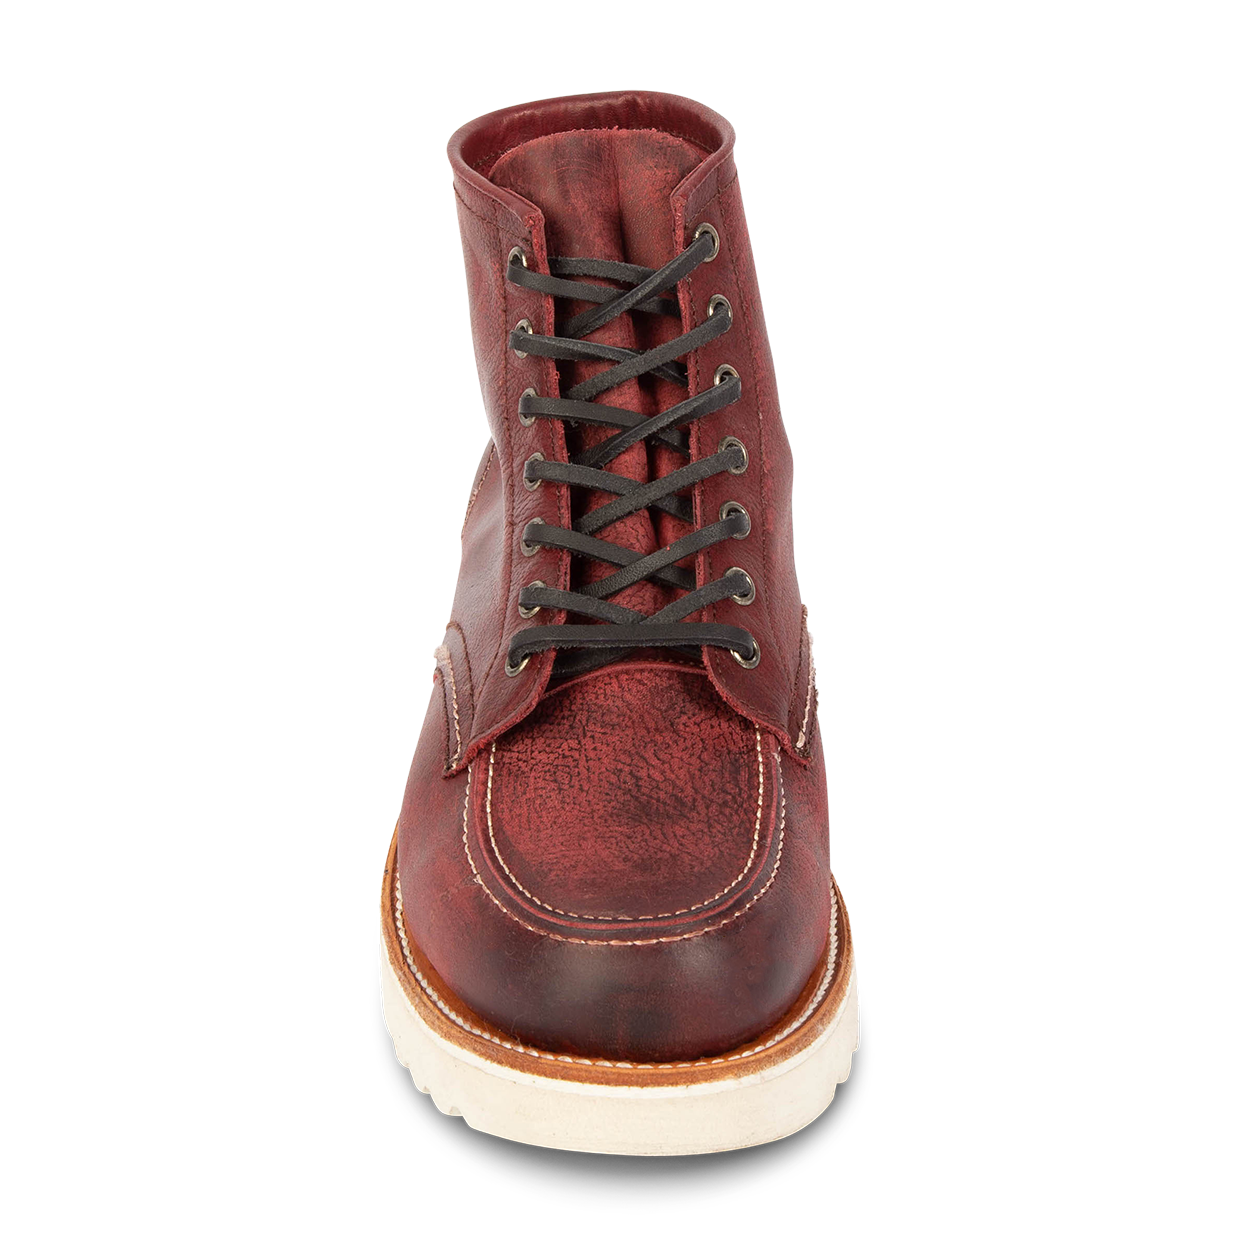 Front view showing leather tongue construction and adjustable leather lace closure on FREEBIRD men's Carbon wine shoe